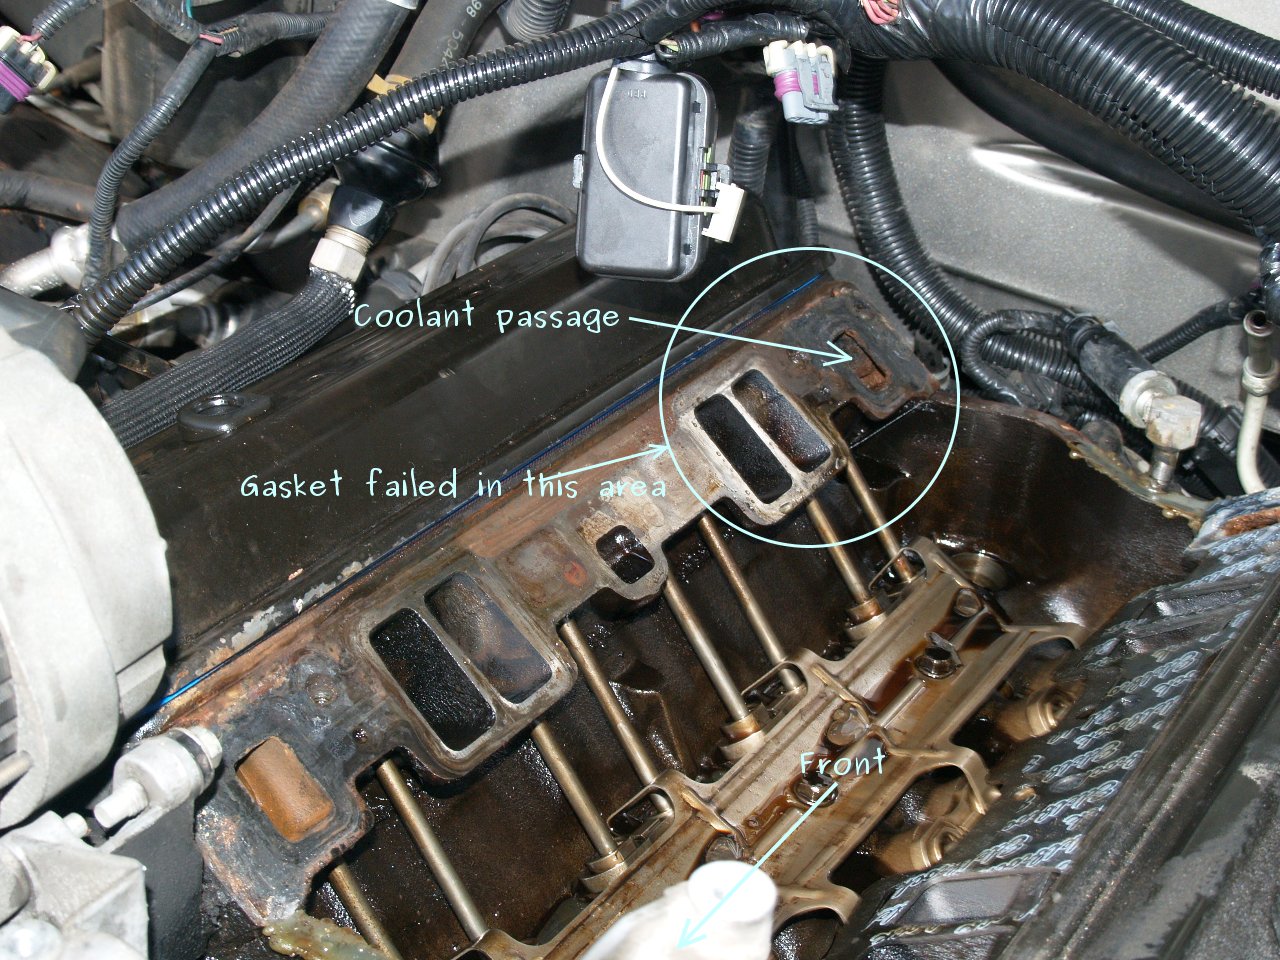 See P108E in engine